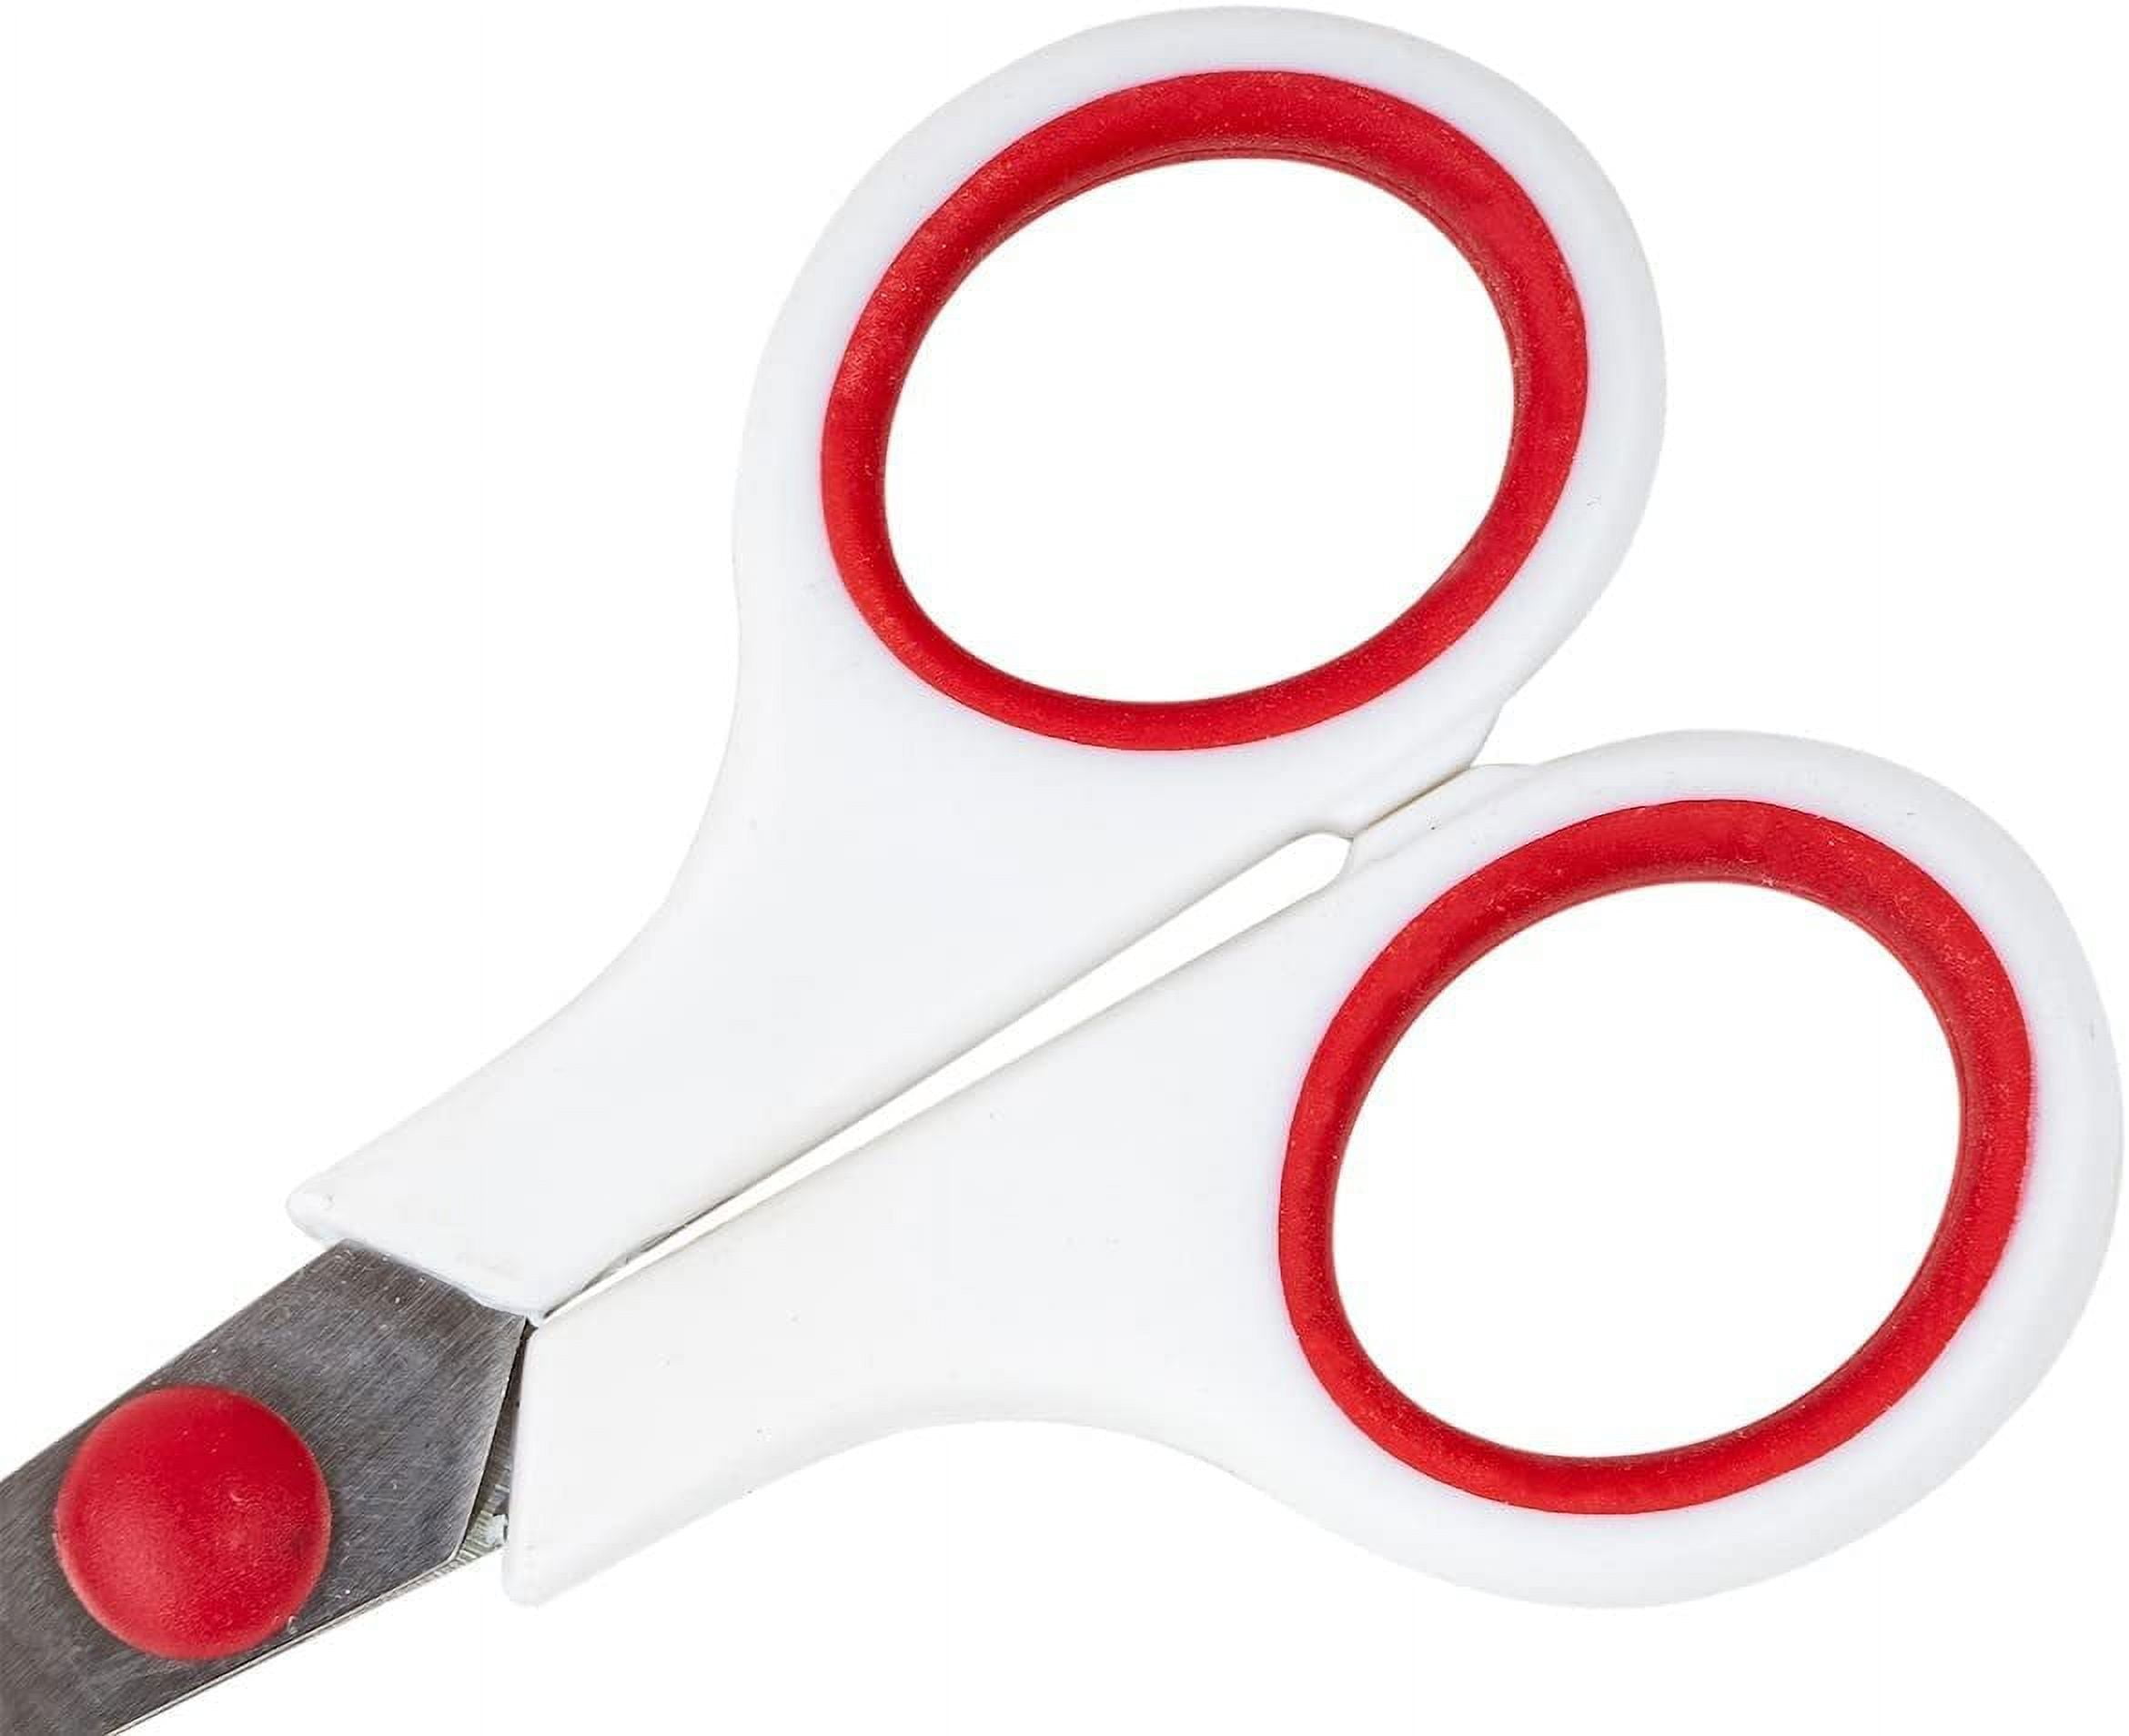 SINGER ProSeries 5.5” Craft Scissors with Power Notch and Comfort Grip by  Singer